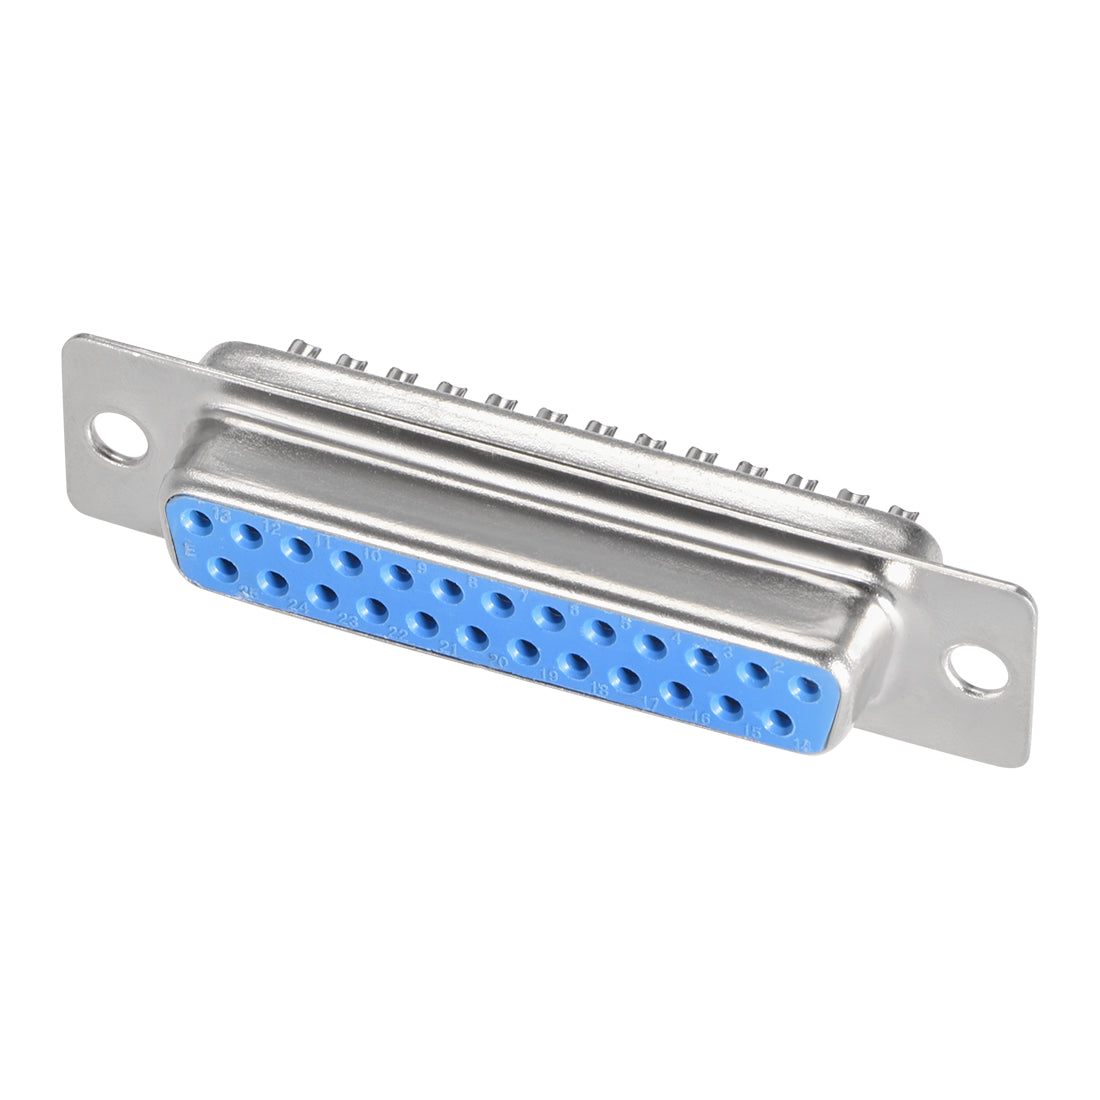 uxcell Uxcell D-sub Connector DB25 Female Socket 25-pin 2-row Port Terminal Breakout for Mechanical Equipment CNC Computers Blue 1pc